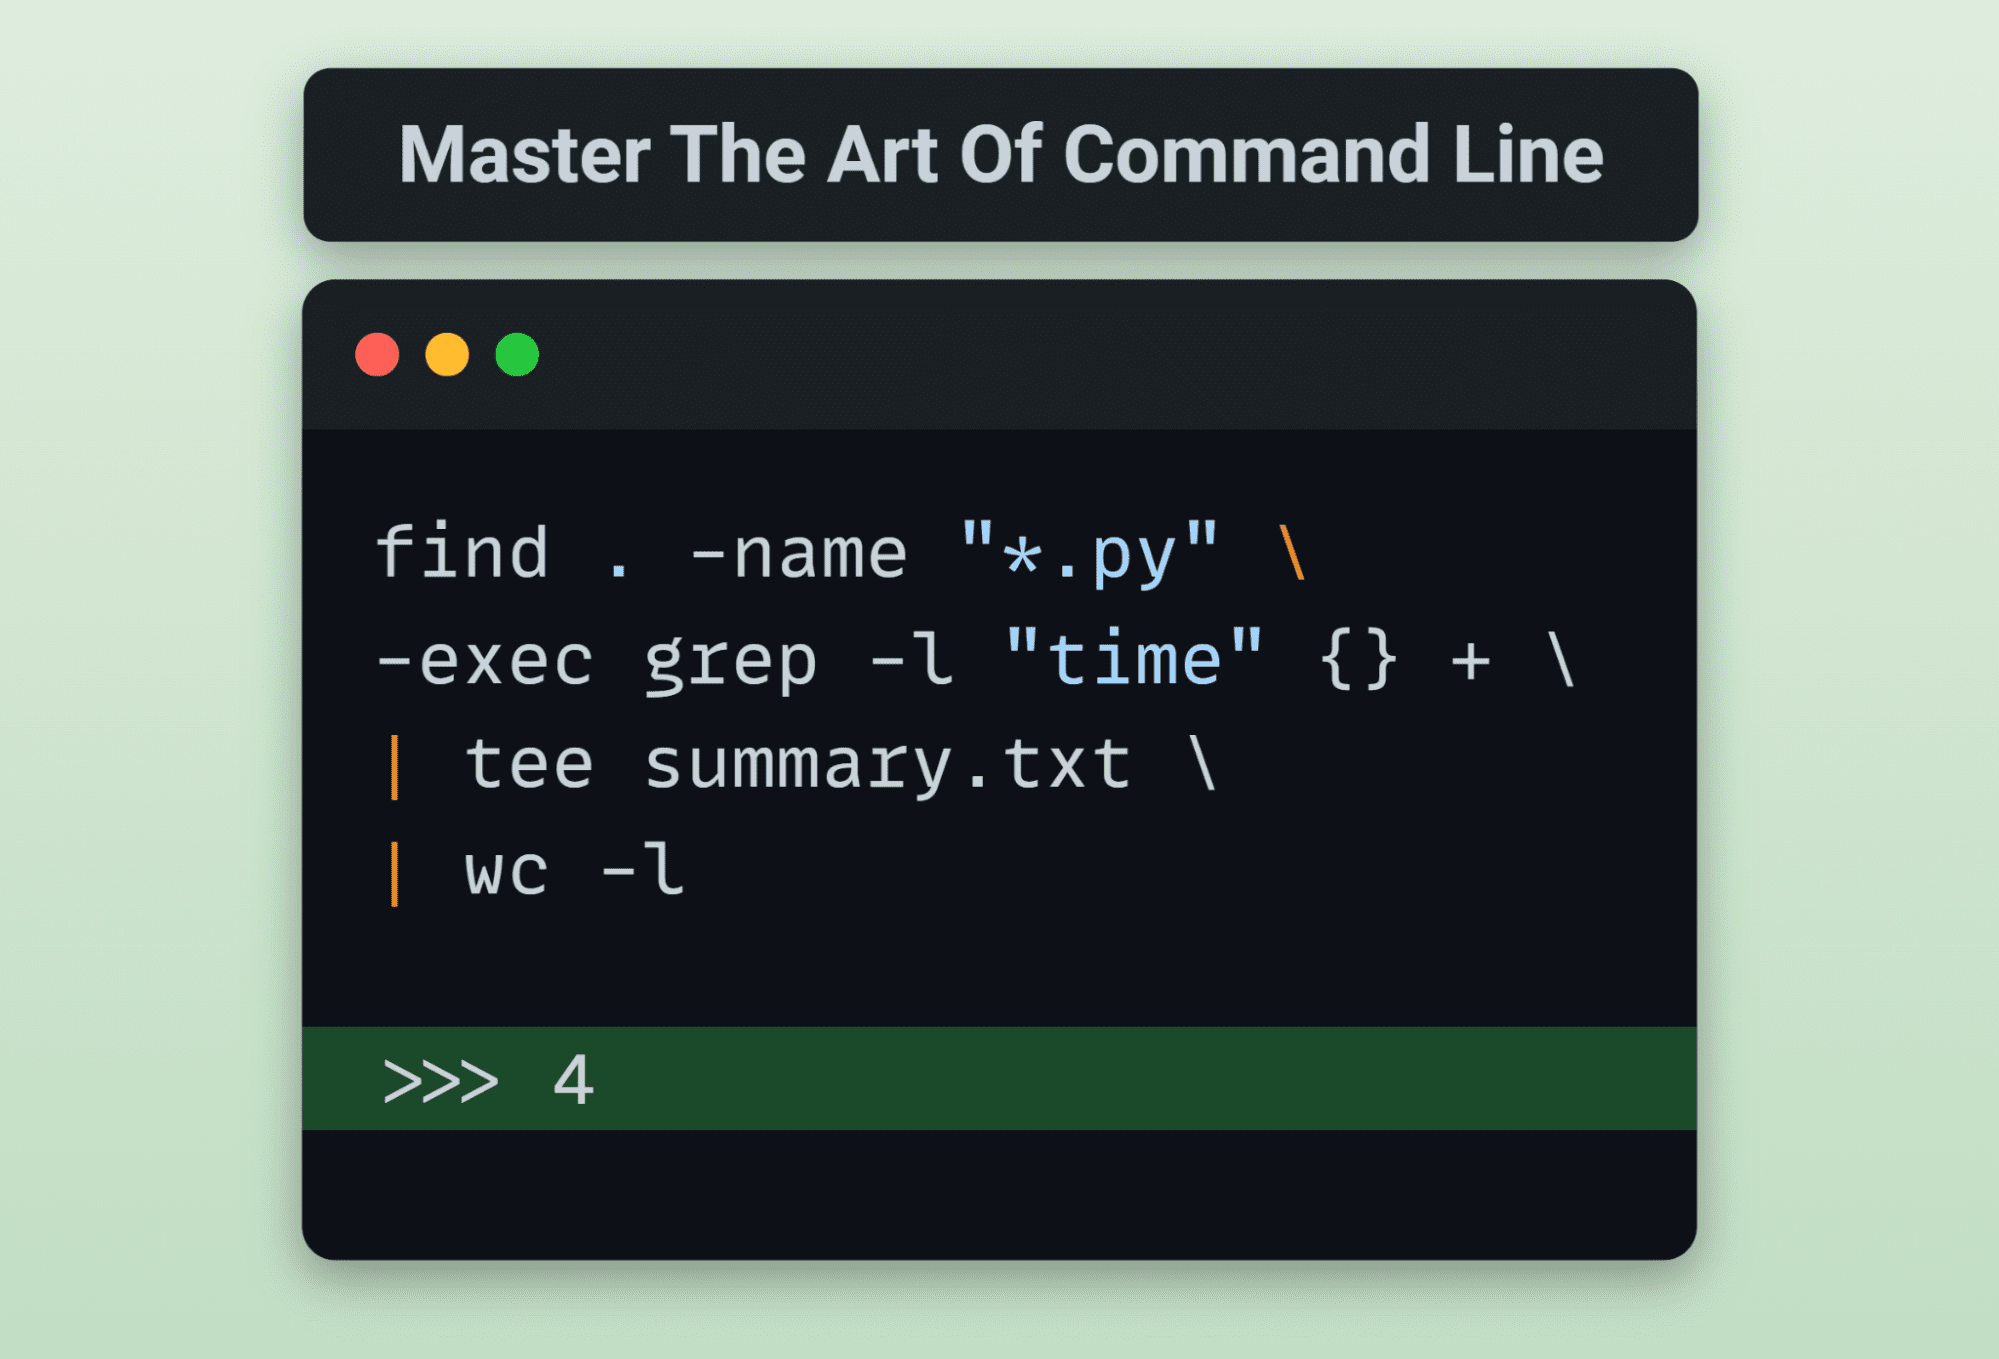 Master The Art Of Command Line With This GitHub Repository - KDnuggets